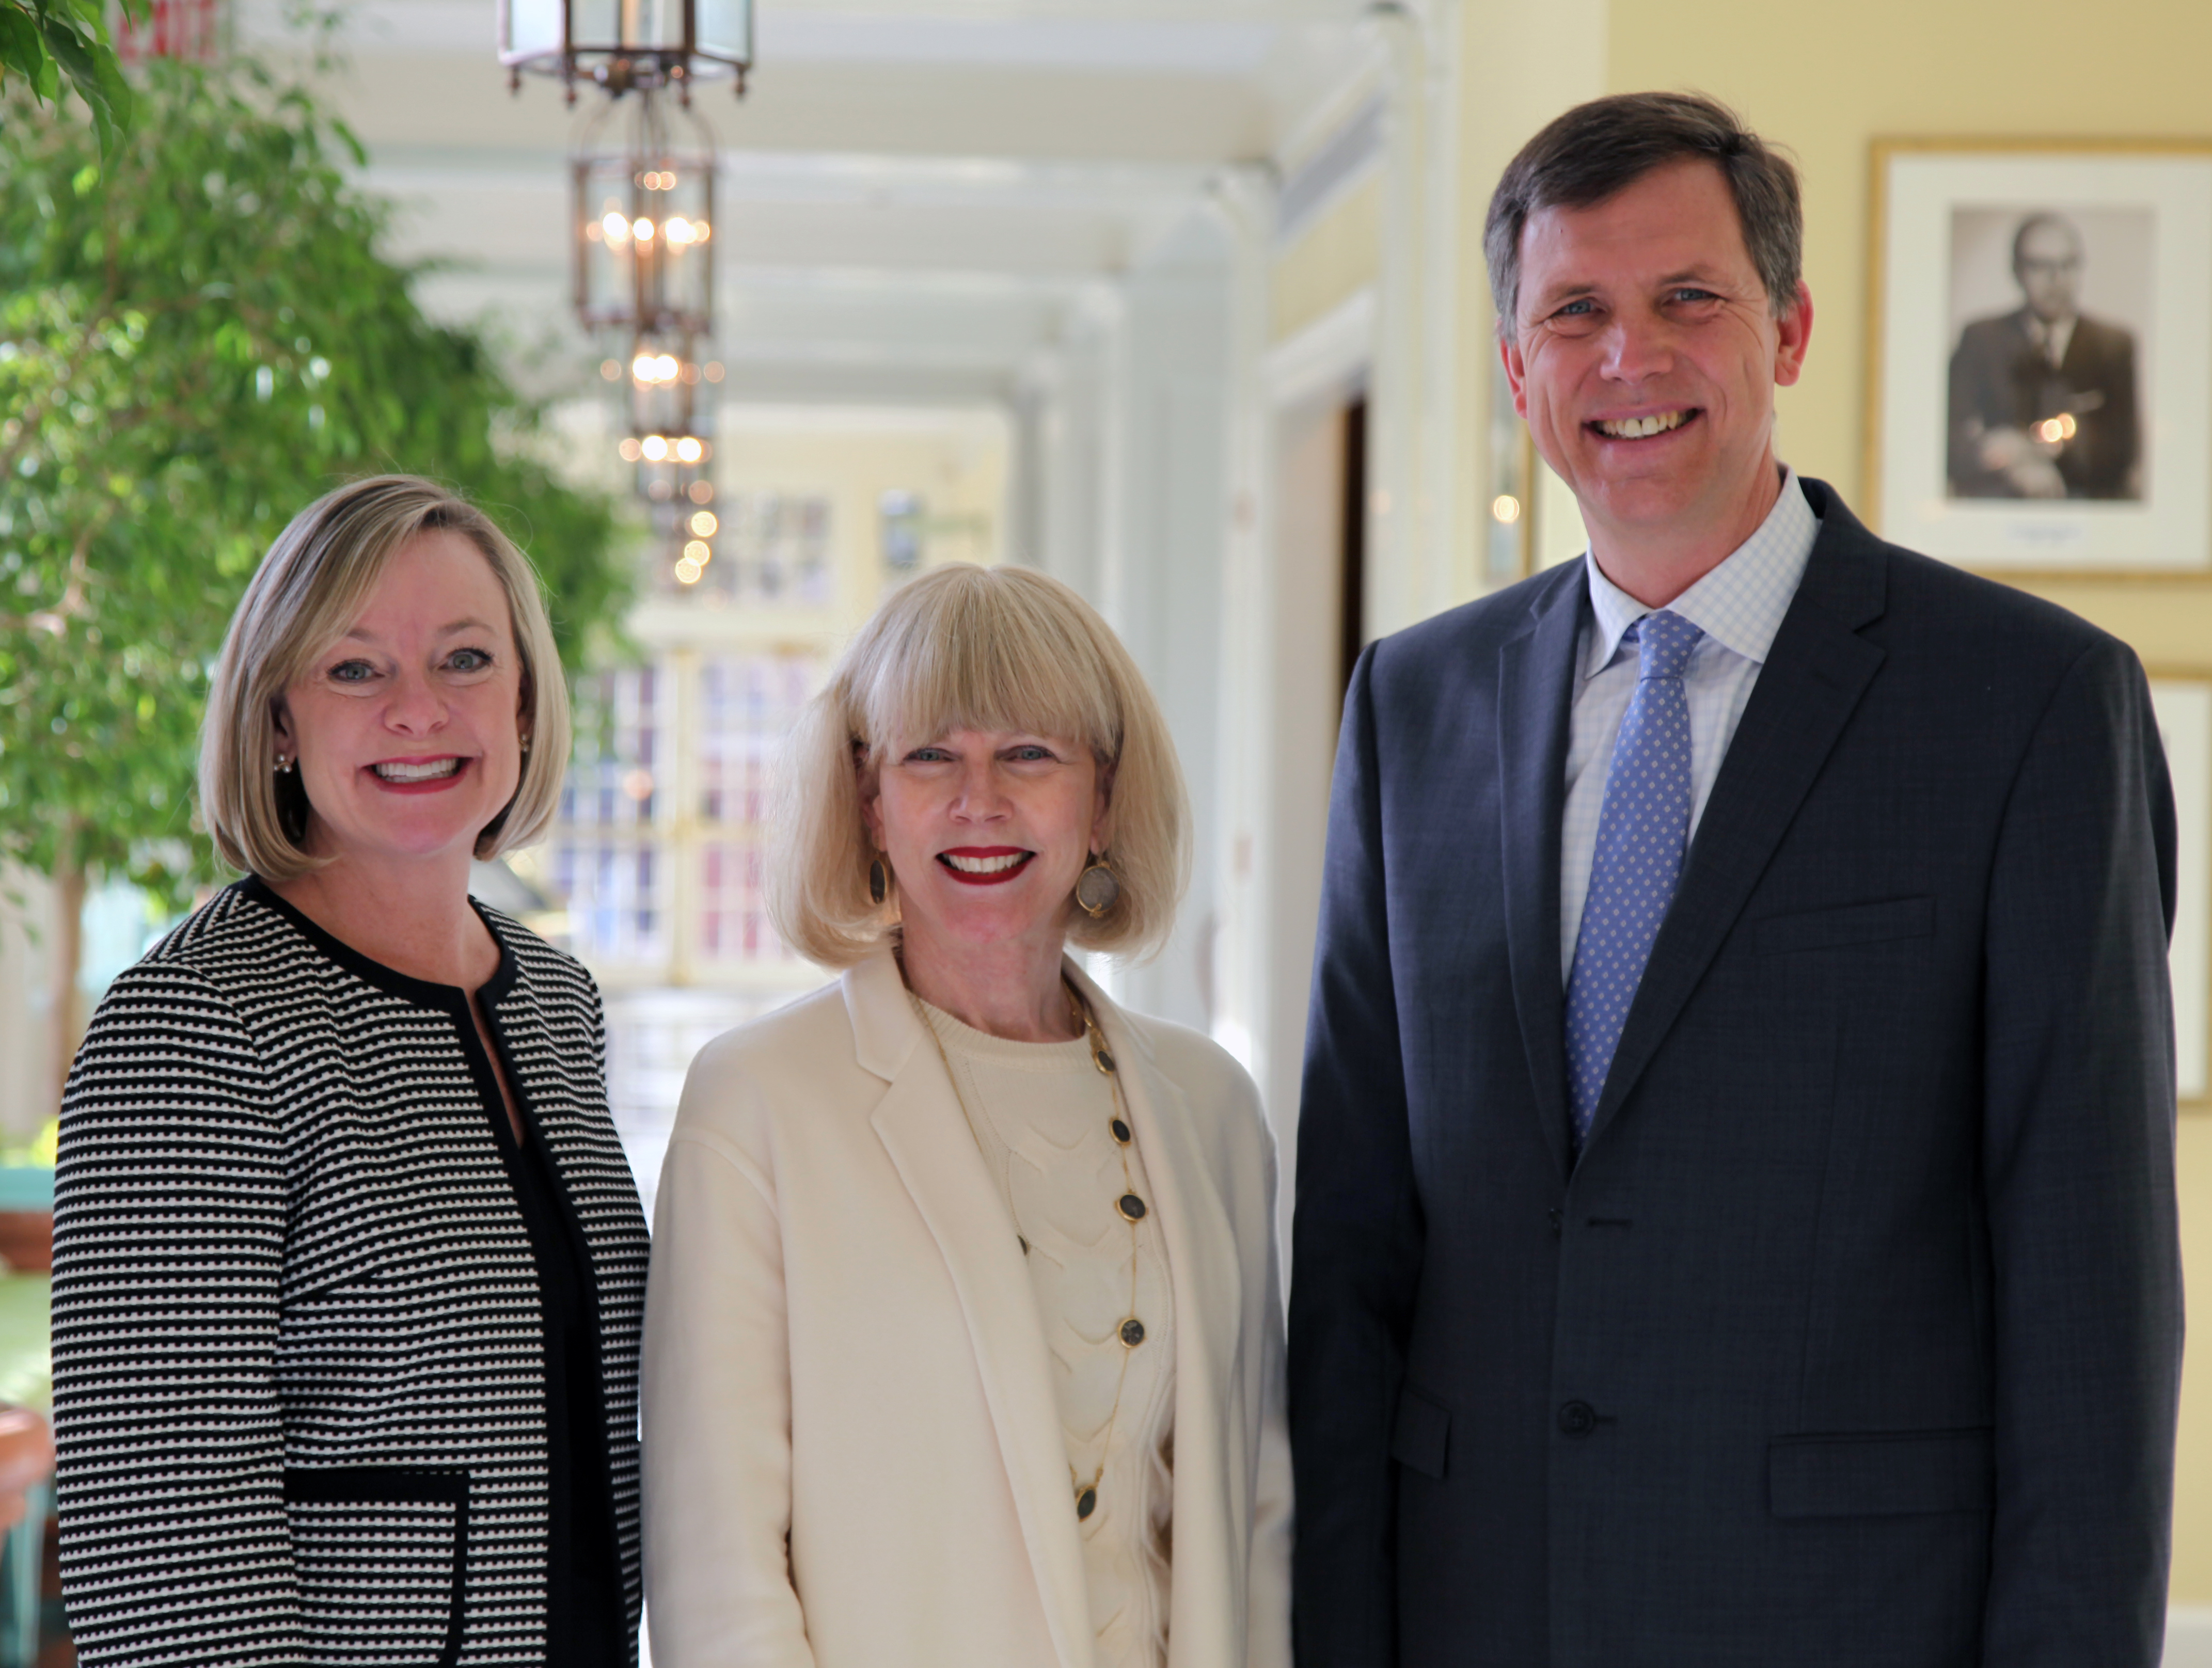 Joanne Ackerman (center) with Leslie Nelson, president of the Medical Foundation of North Carolina, and John Gilmore, MD, director of UNC Center for Excellence in Community Mental Health